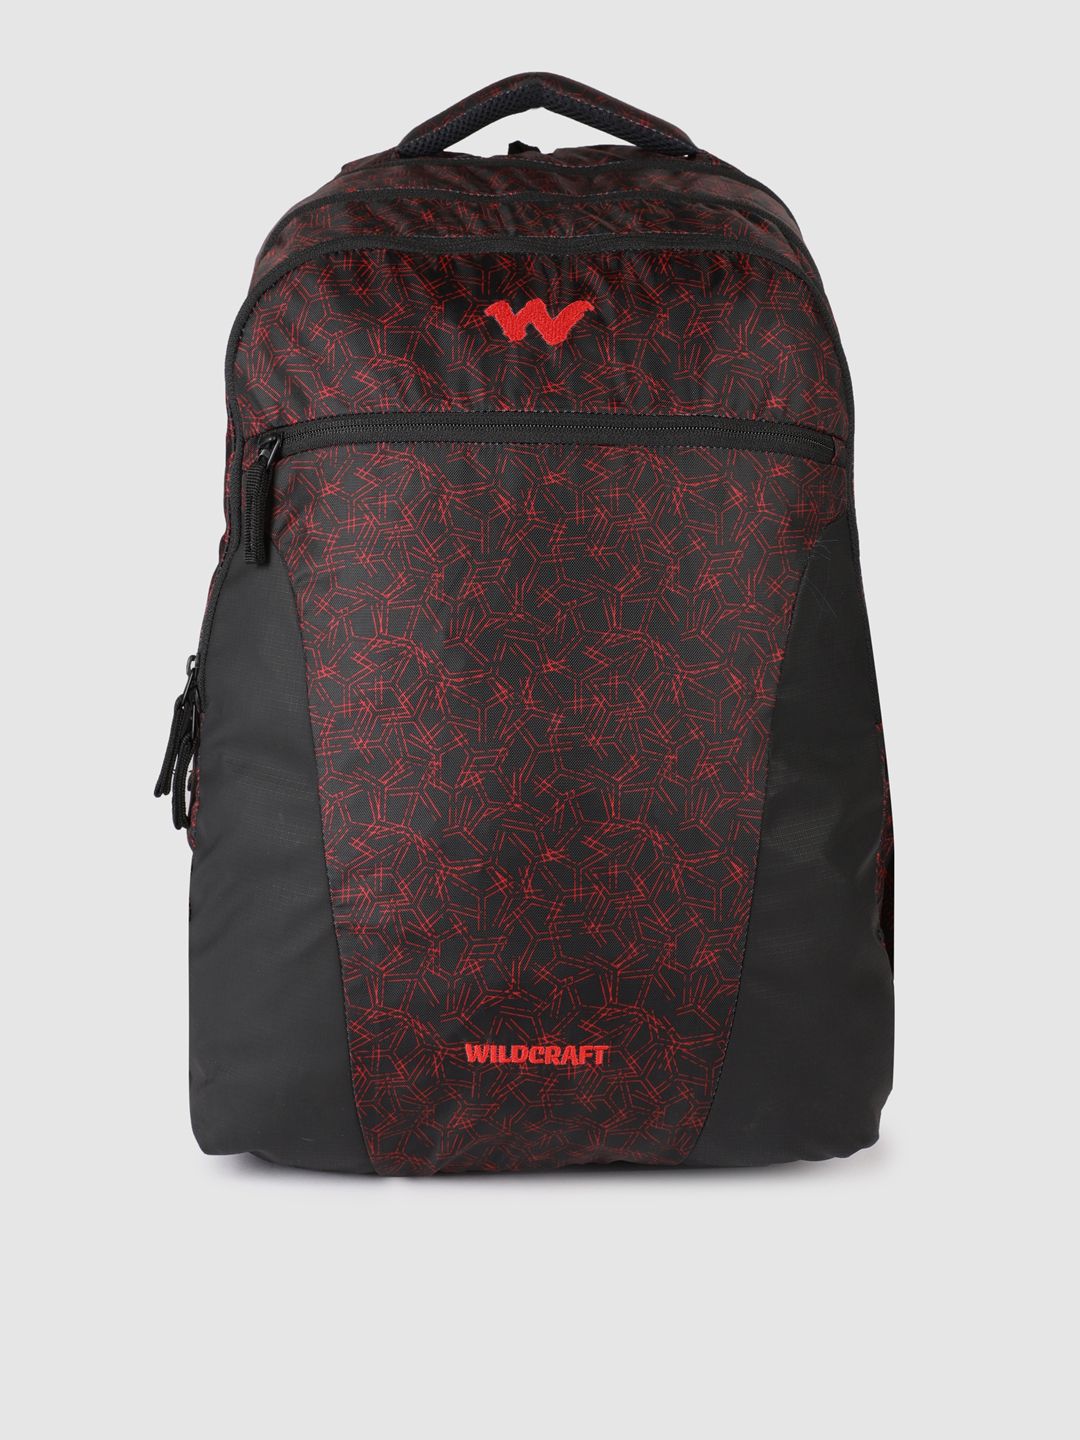 Wildcraft Unisex Red & Black Graphic Bravo3 Spyker Backpack Price in India